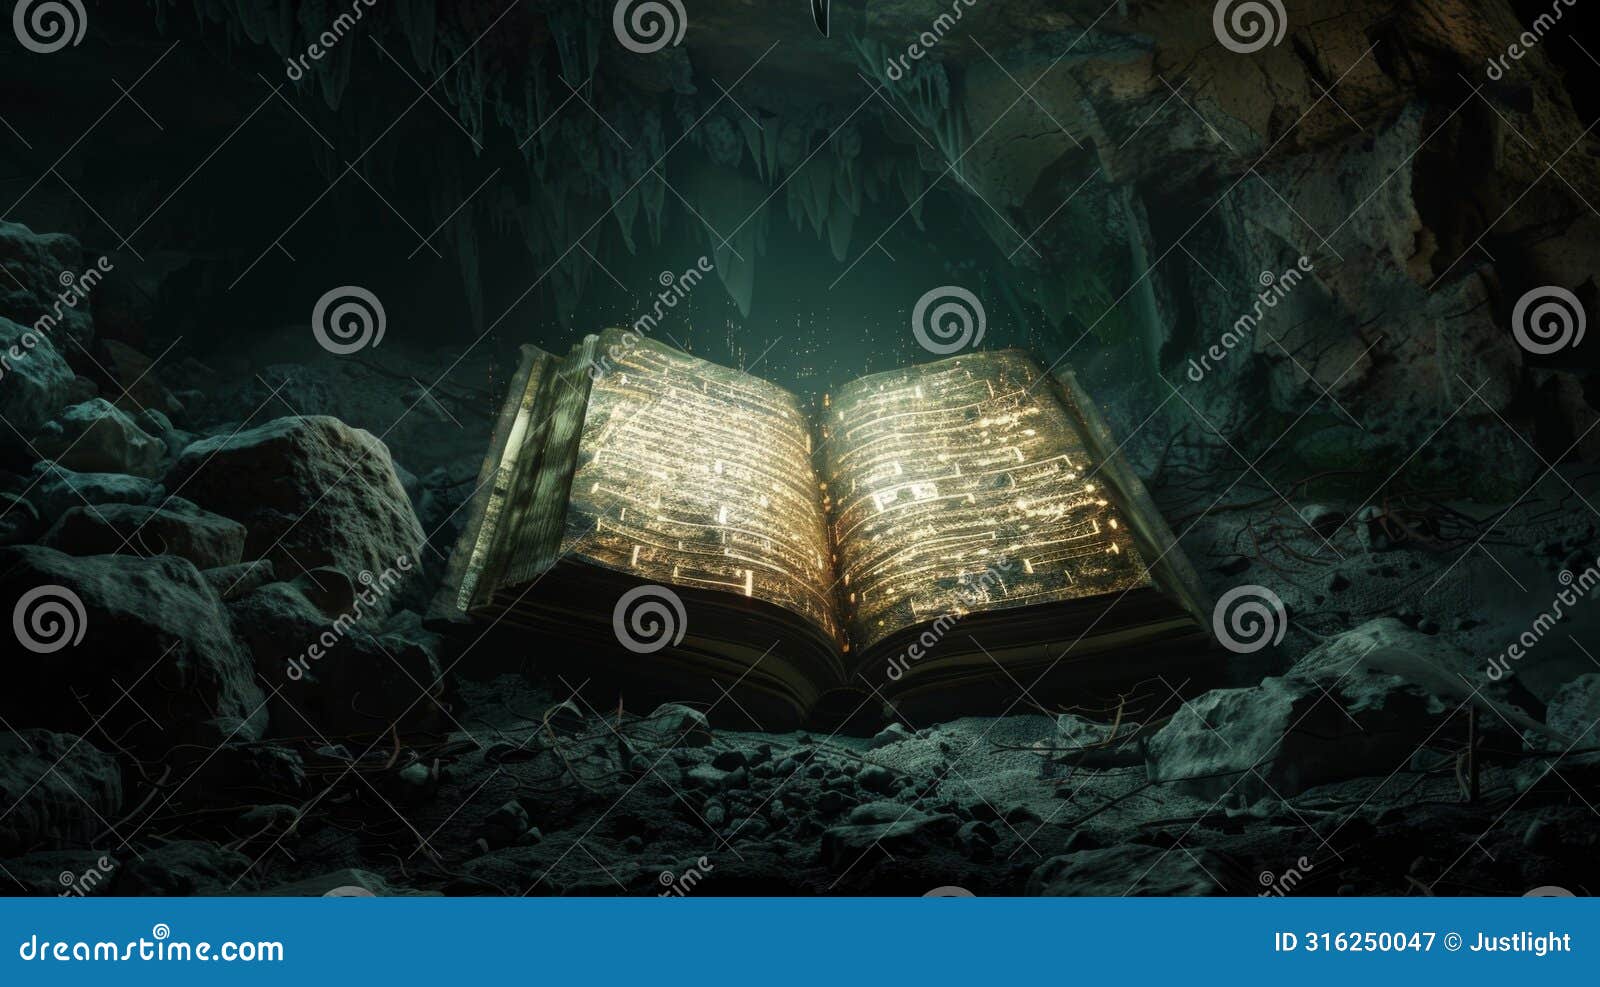 in the dark depths of a hidden cave an illuminated mcript floats in the air its pages turning on their own accord. the